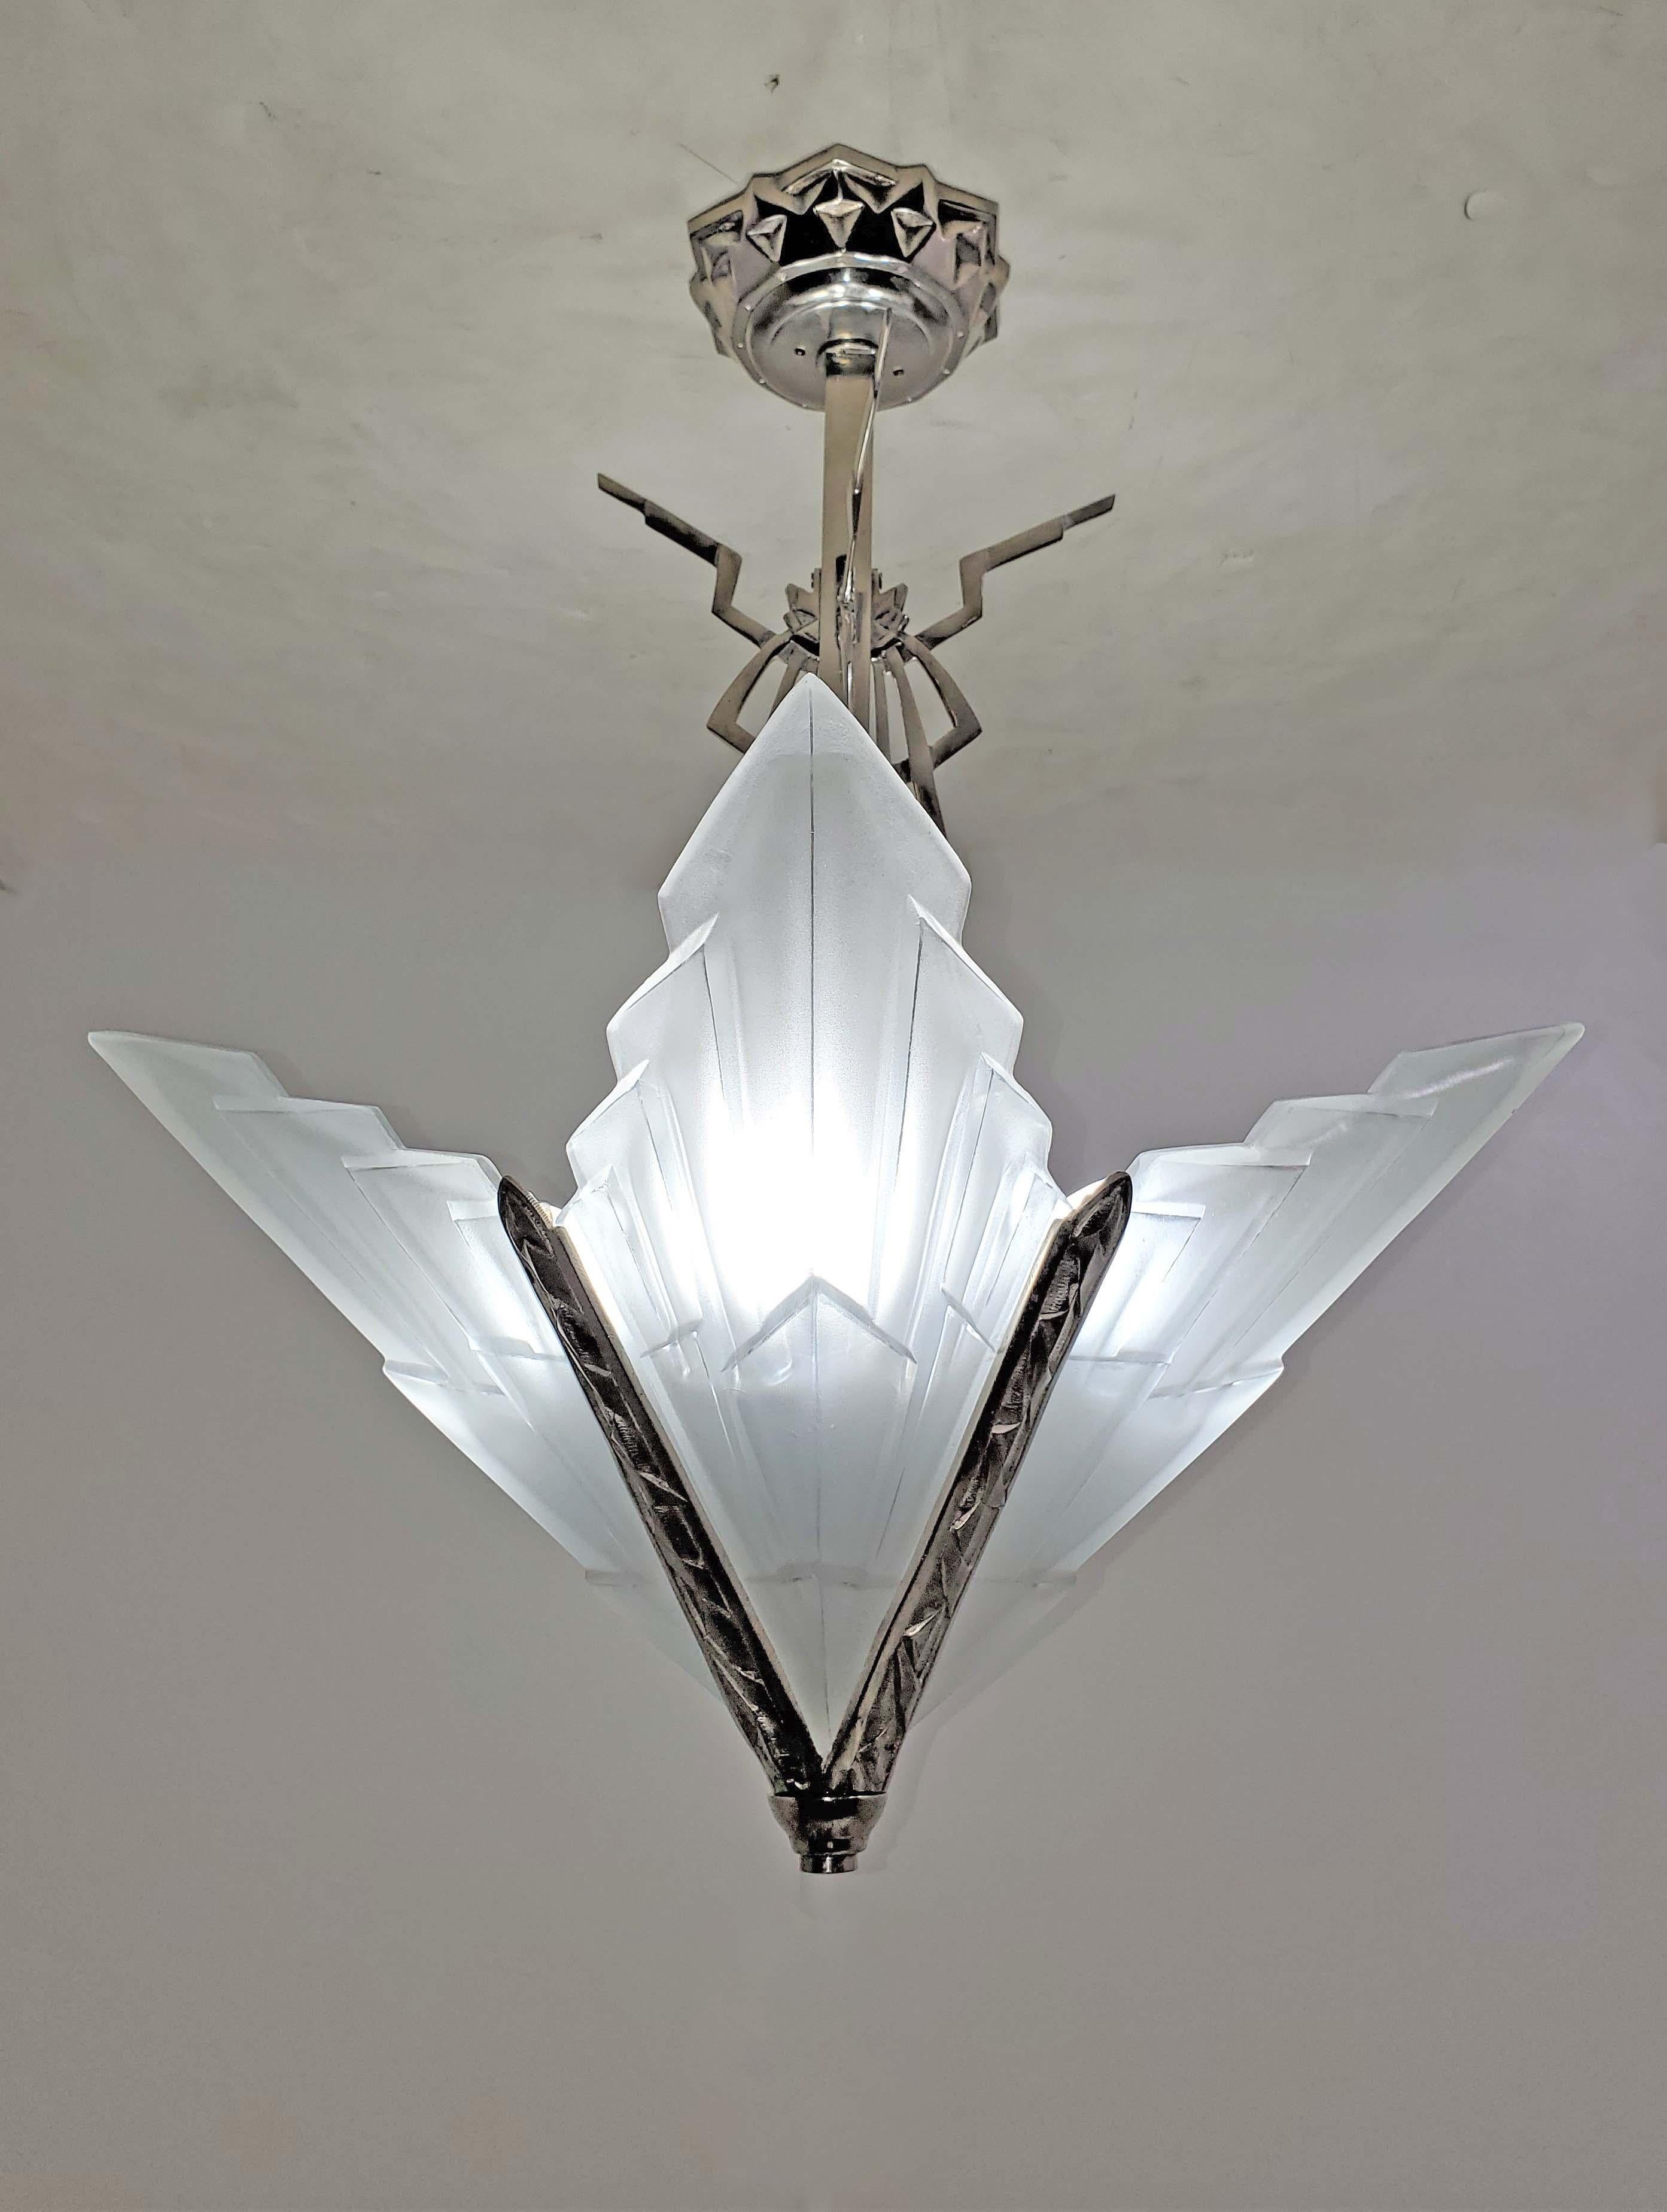 French Art Deco geometric motif chandelier signed Degue featuring four wing shaped frosted and molded art glass panels with chevron design, jagged ends and polished details.  
The architectural panels jut upward and outward in an unusual star